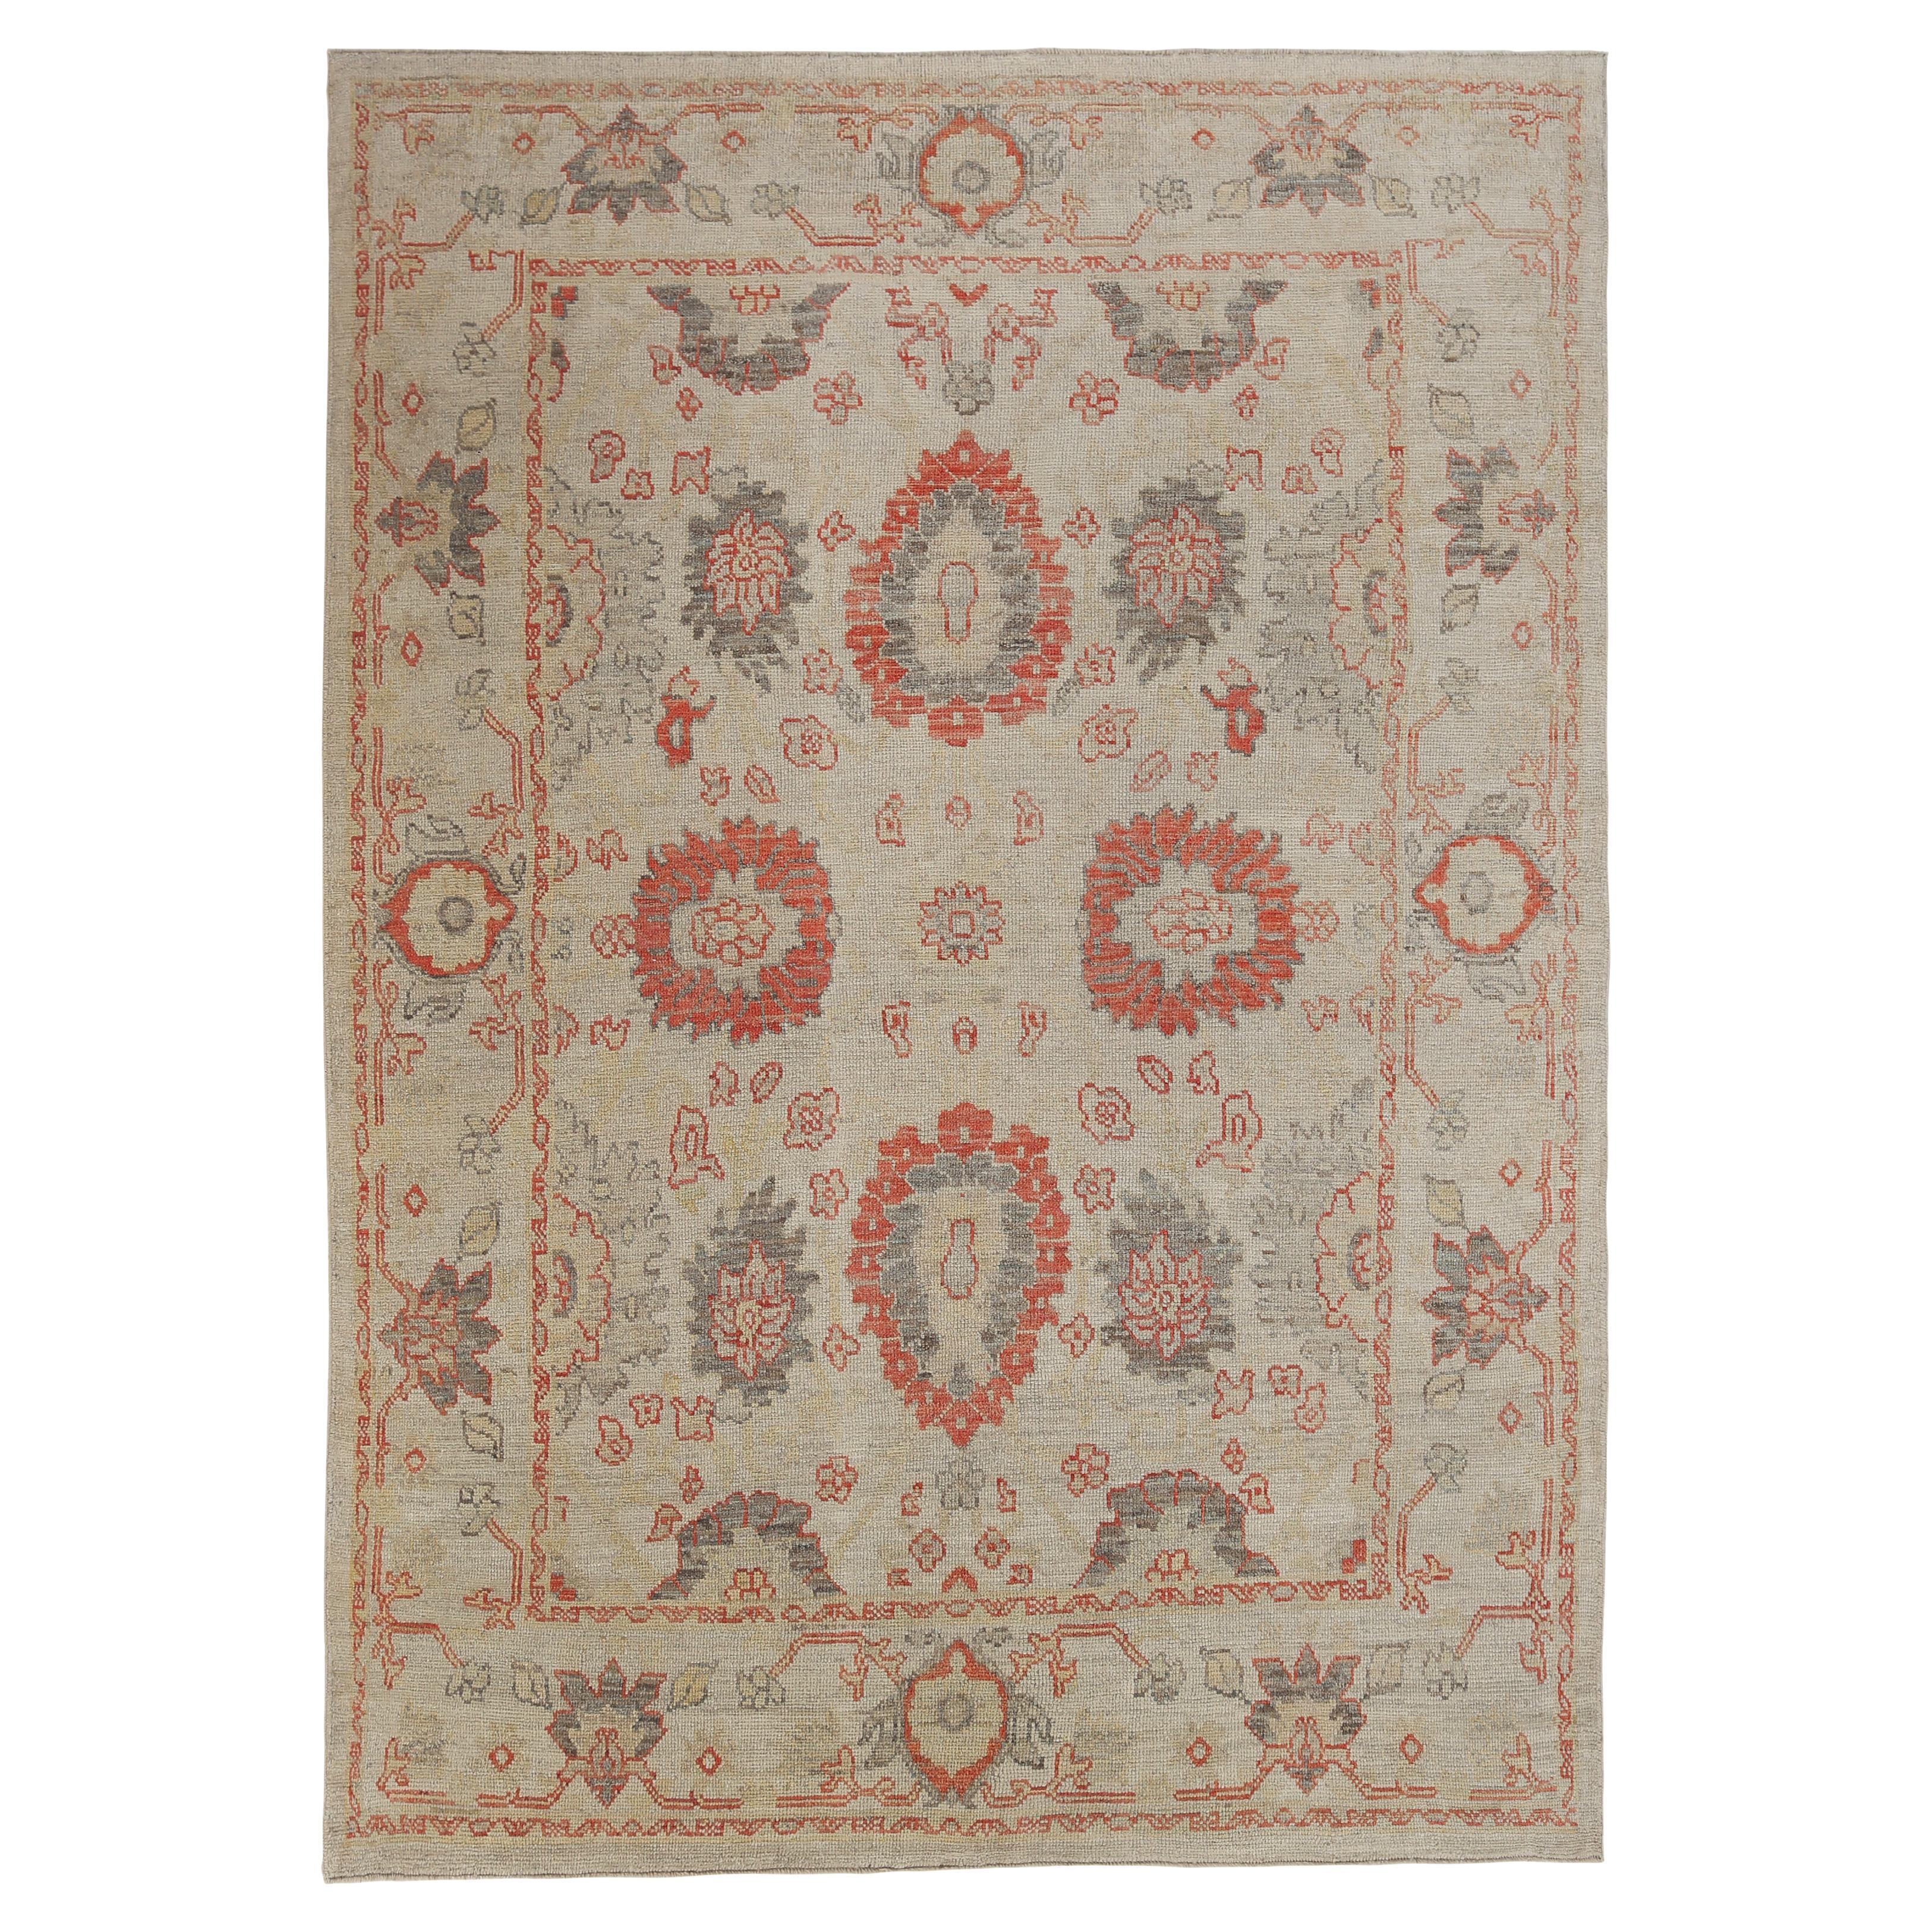 Handmade Turkish Oushak Rug with Bright Floral Motifs